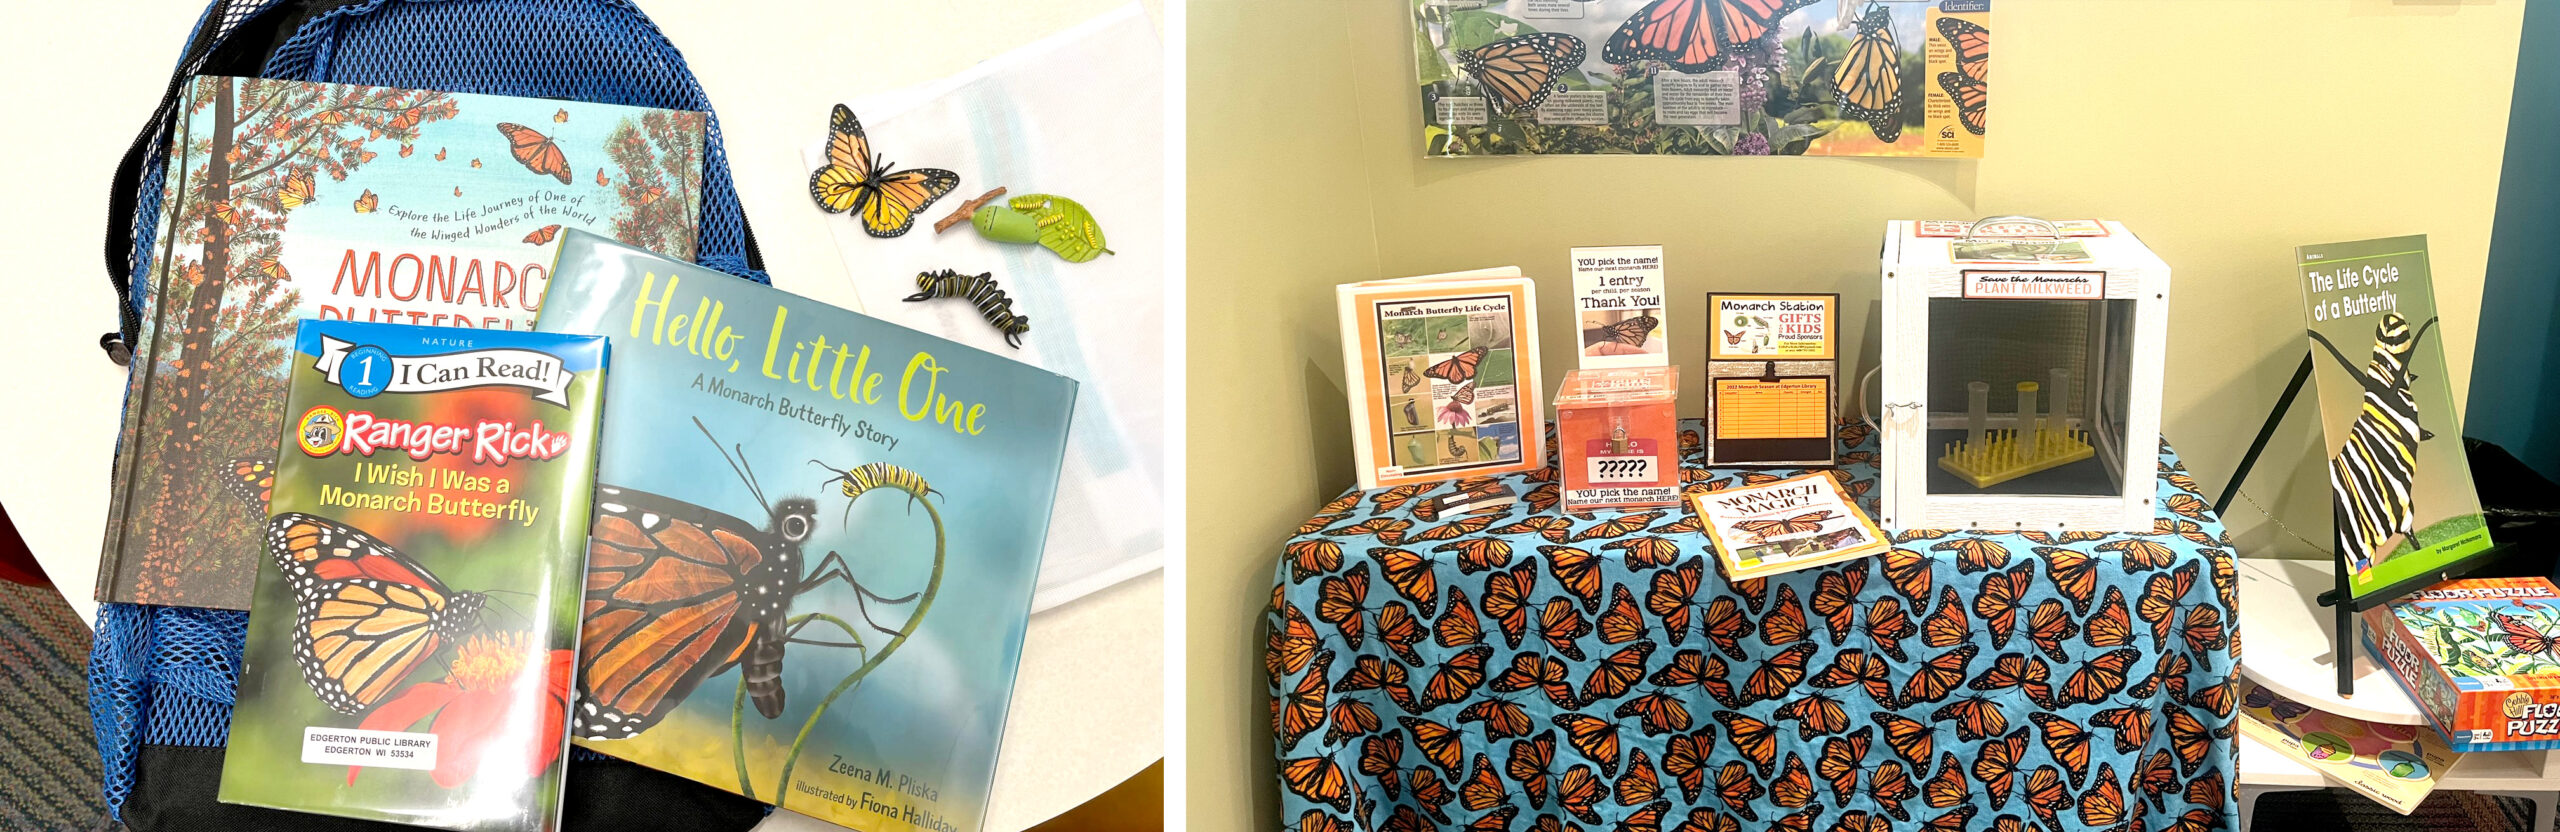 Monarch butterfly displays in the kids' area of Edgerton Public Library.